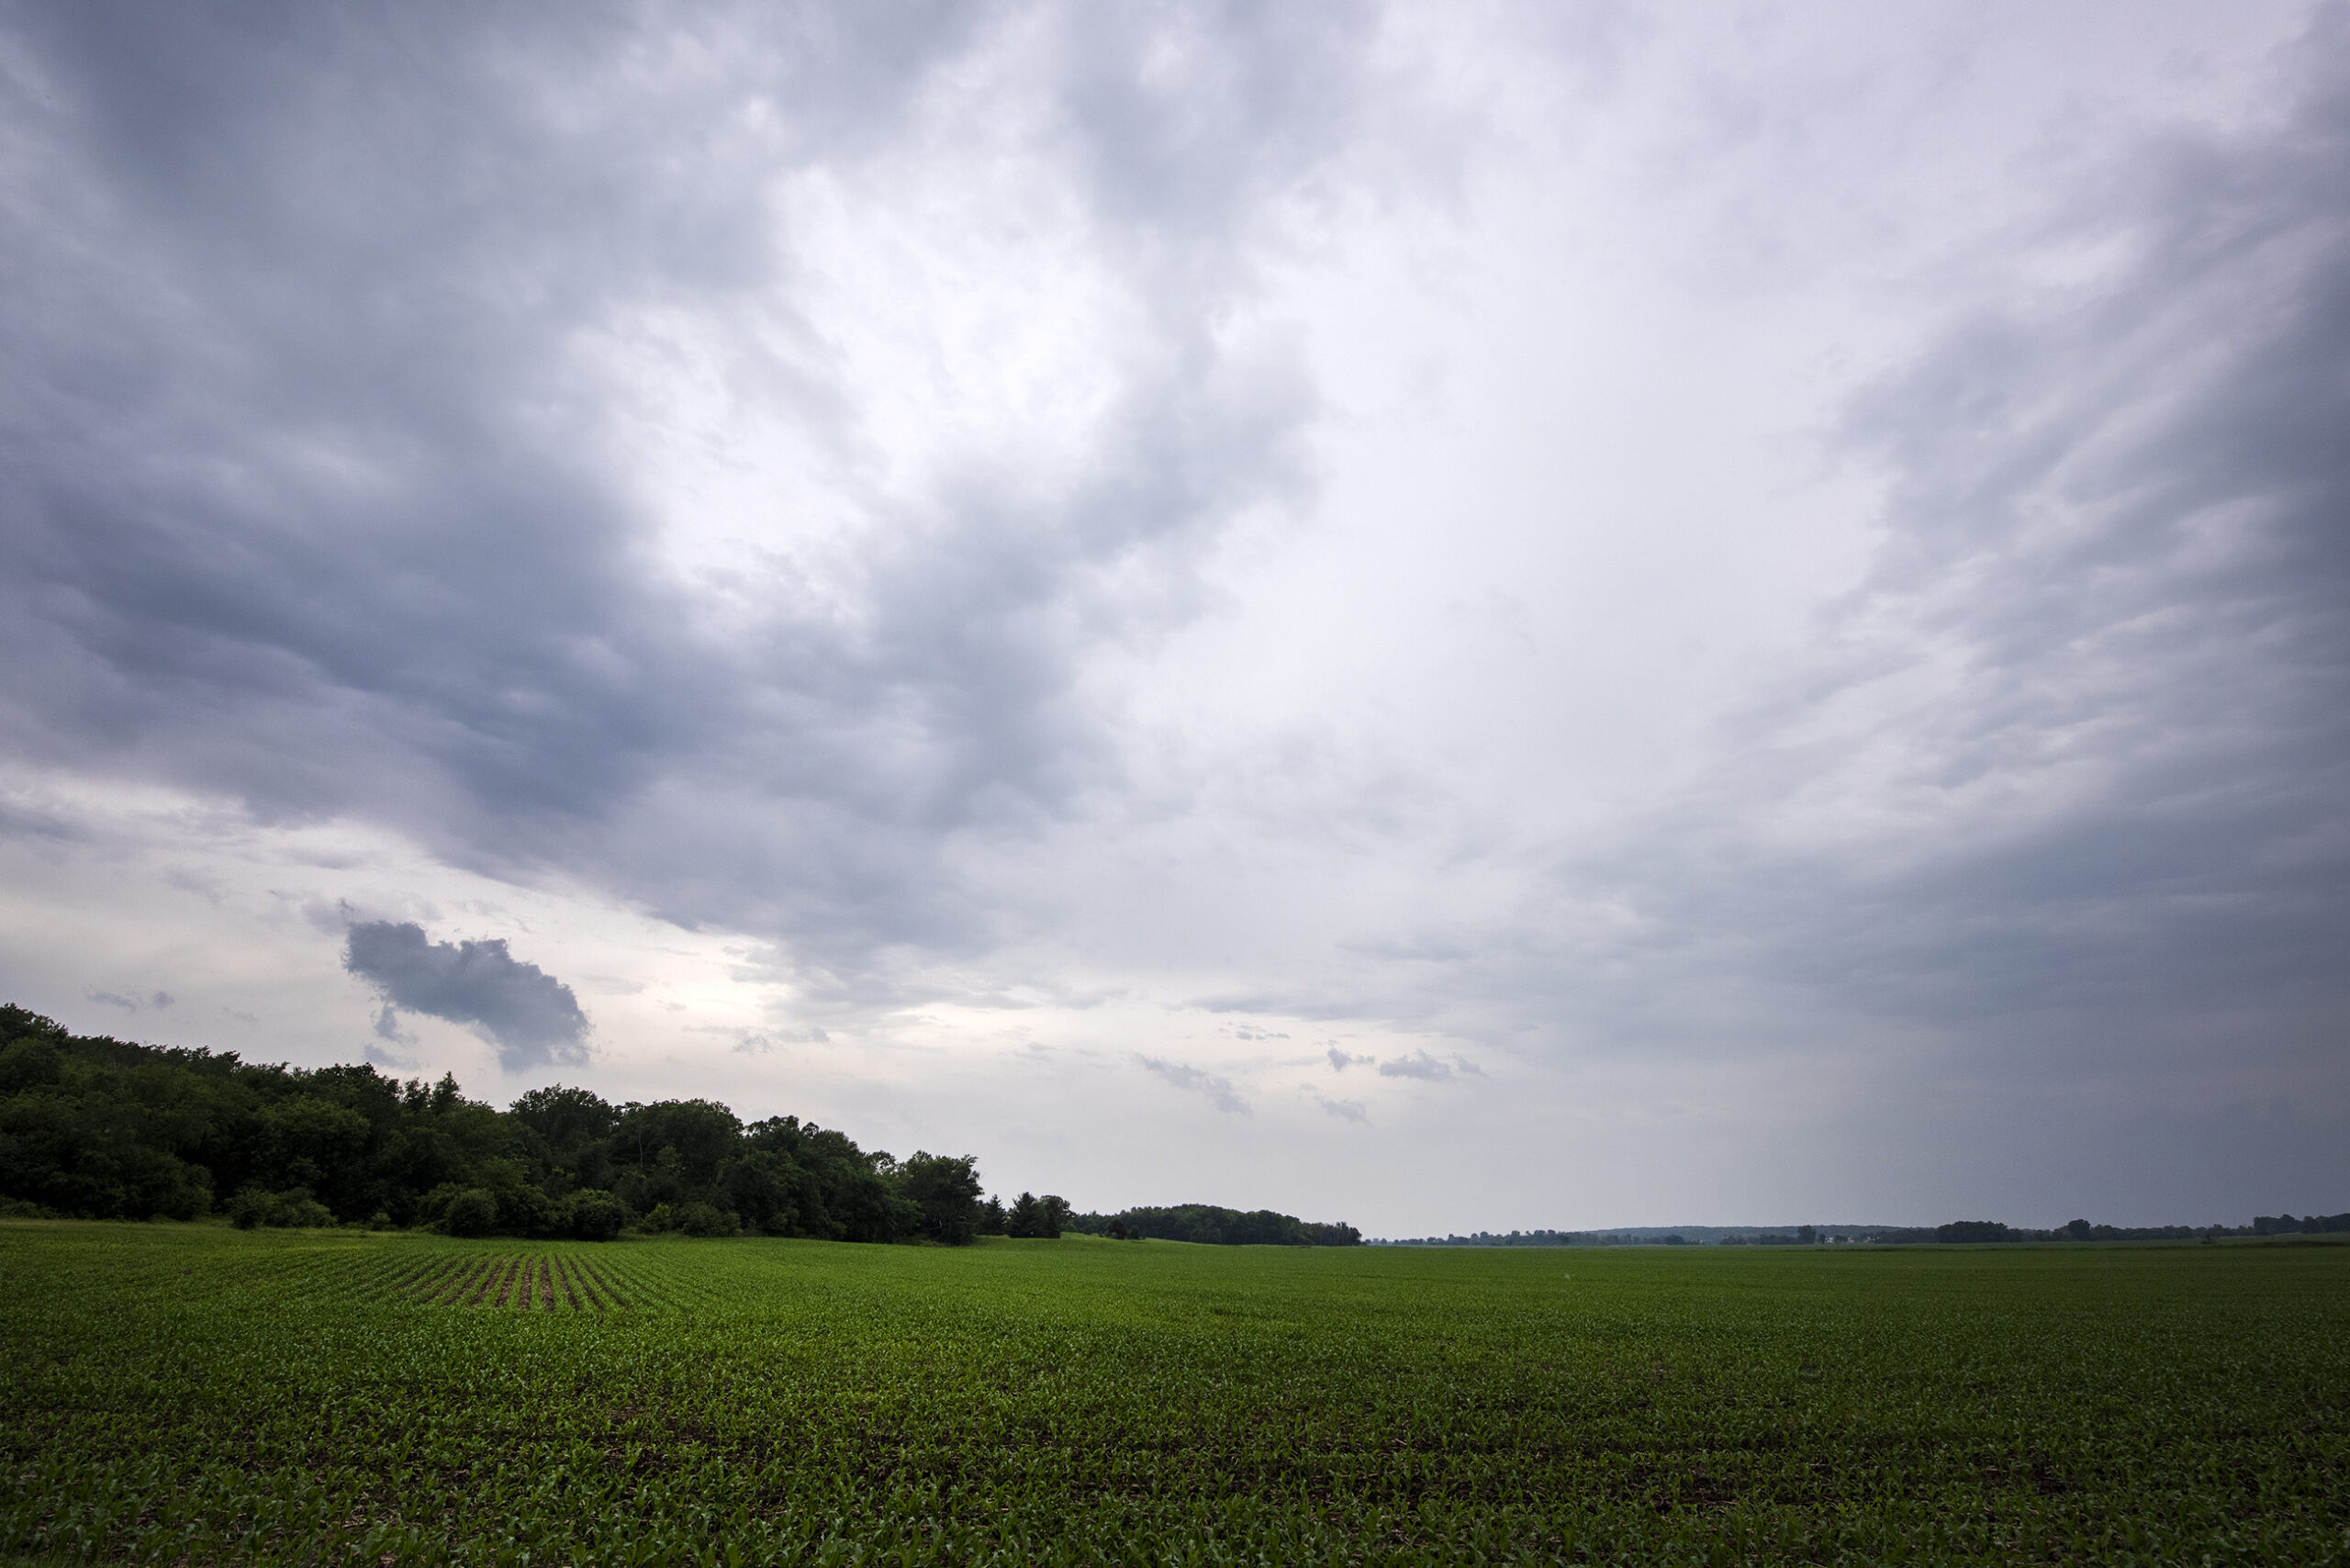 Green crops are backdropped by dark clouds in the sky.